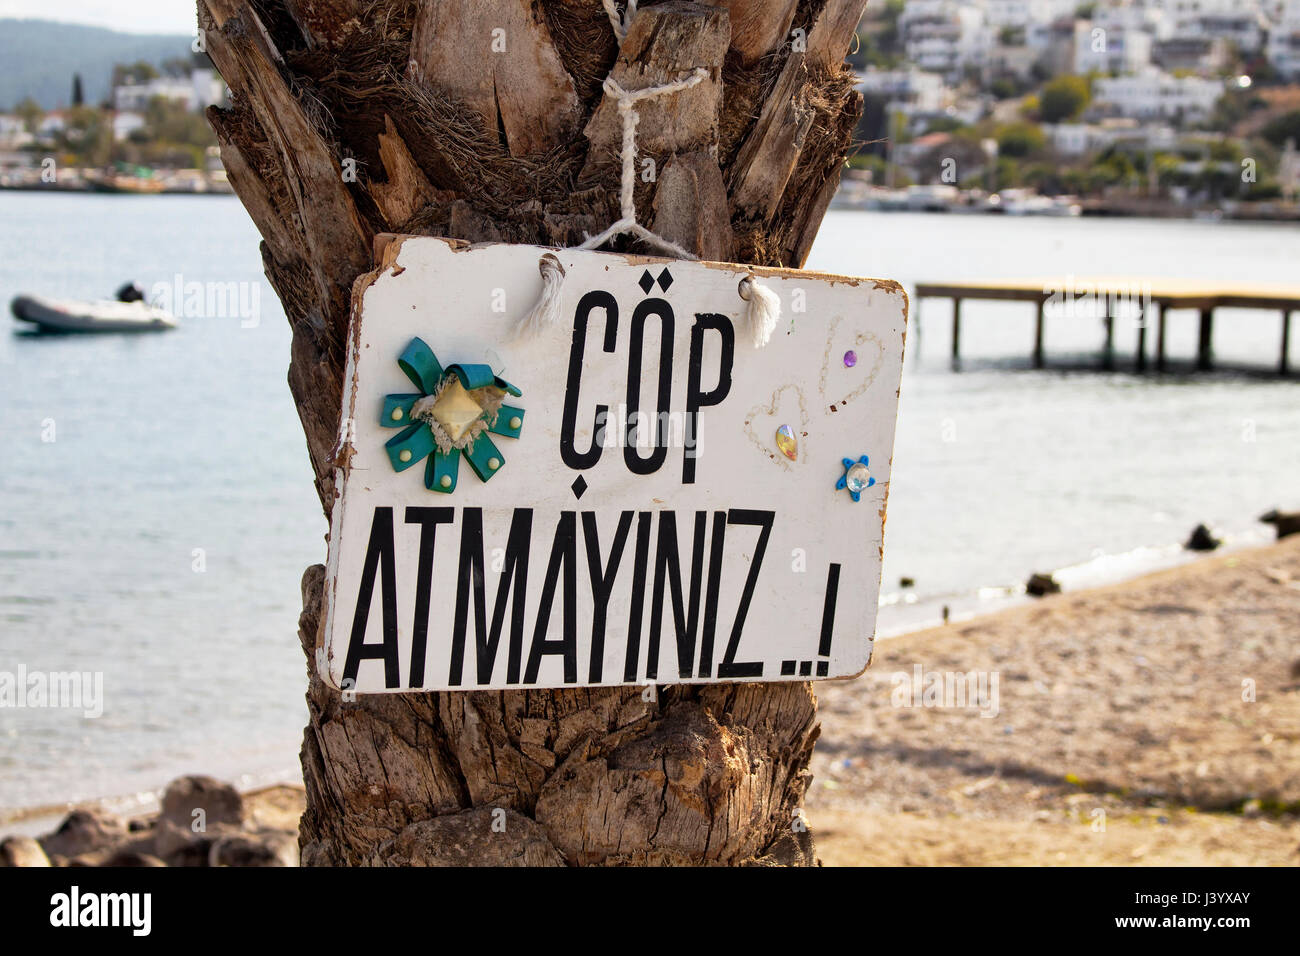 A wooden signage of 'Cop Atmayiniz' meaning 'Don't litter' in Turkish at a beach in Turkbuku village in Bodrum peninsula located in southwestern Turke Stock Photo